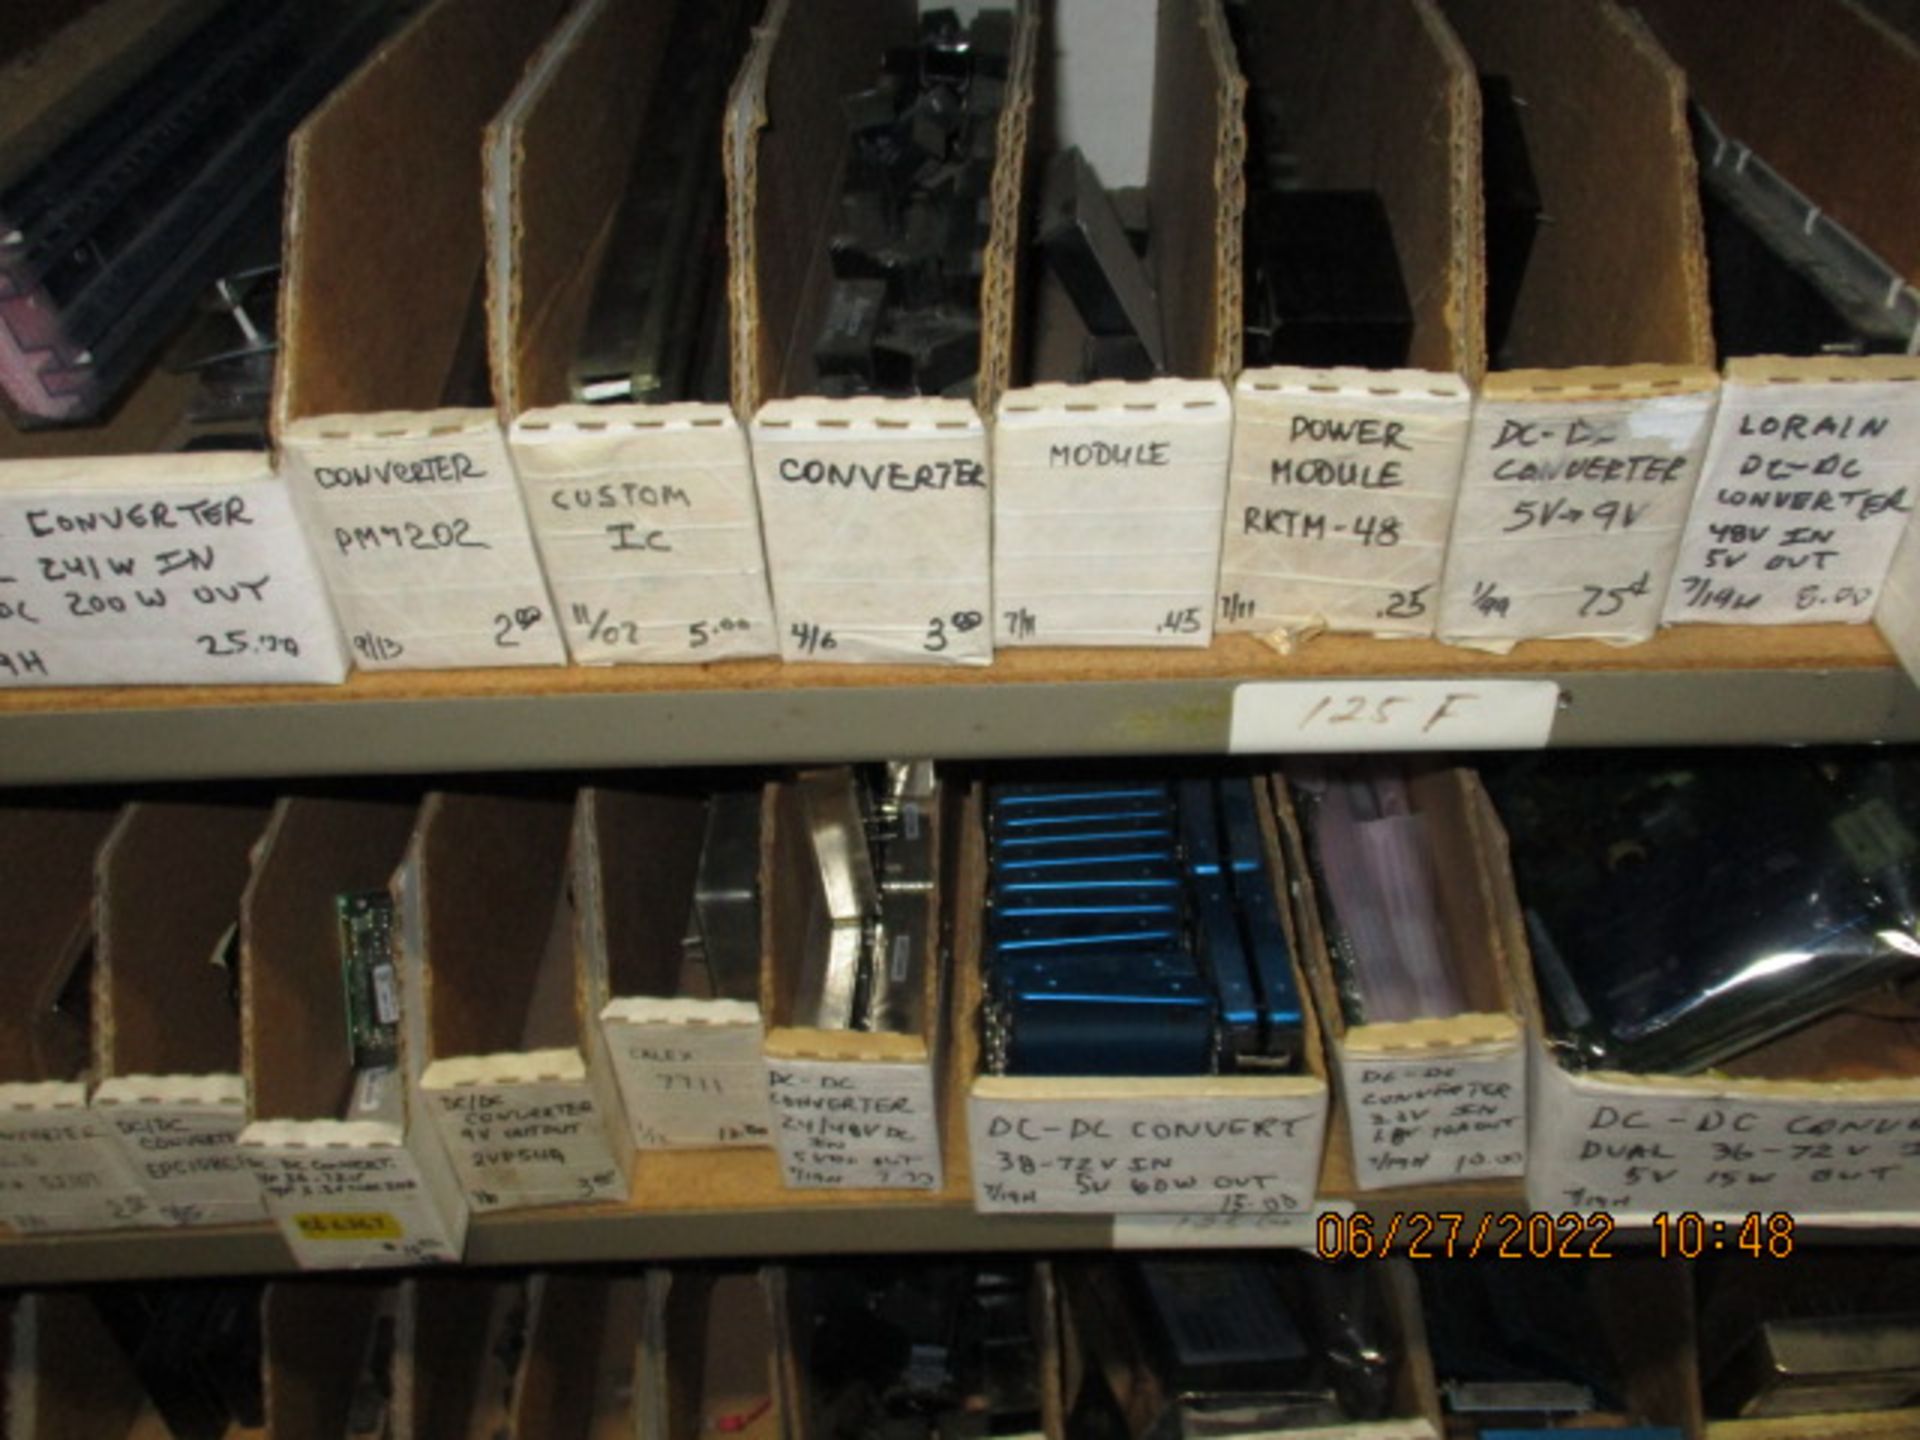 CONTENTS OF SHELVING UNIT CONSISTING OF SMD DIODES, SMD FILTERS, DC/DC CONVERTERS, MODULES, POWER - Image 6 of 7